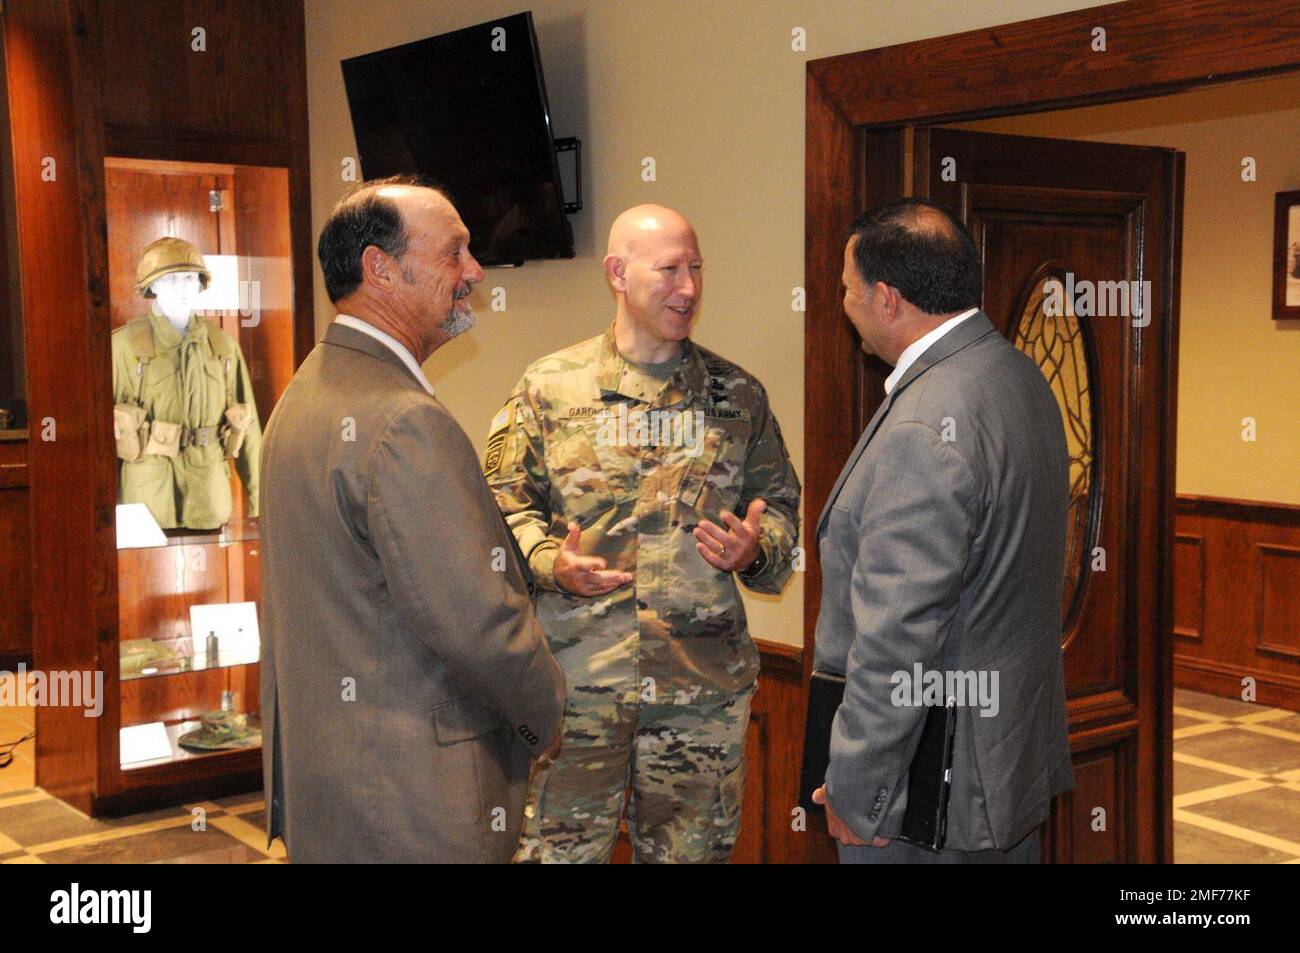 Brig. Gen. David W. Gardner, Joint Readiness Training Center and Fort Polk commanding general, (center) speaks with Rick Allen, Leesville mayor, (right) and Keith Lewing, Anacoco mayor, at a round table for area civic leaders held Aug. 17. Stock Photo